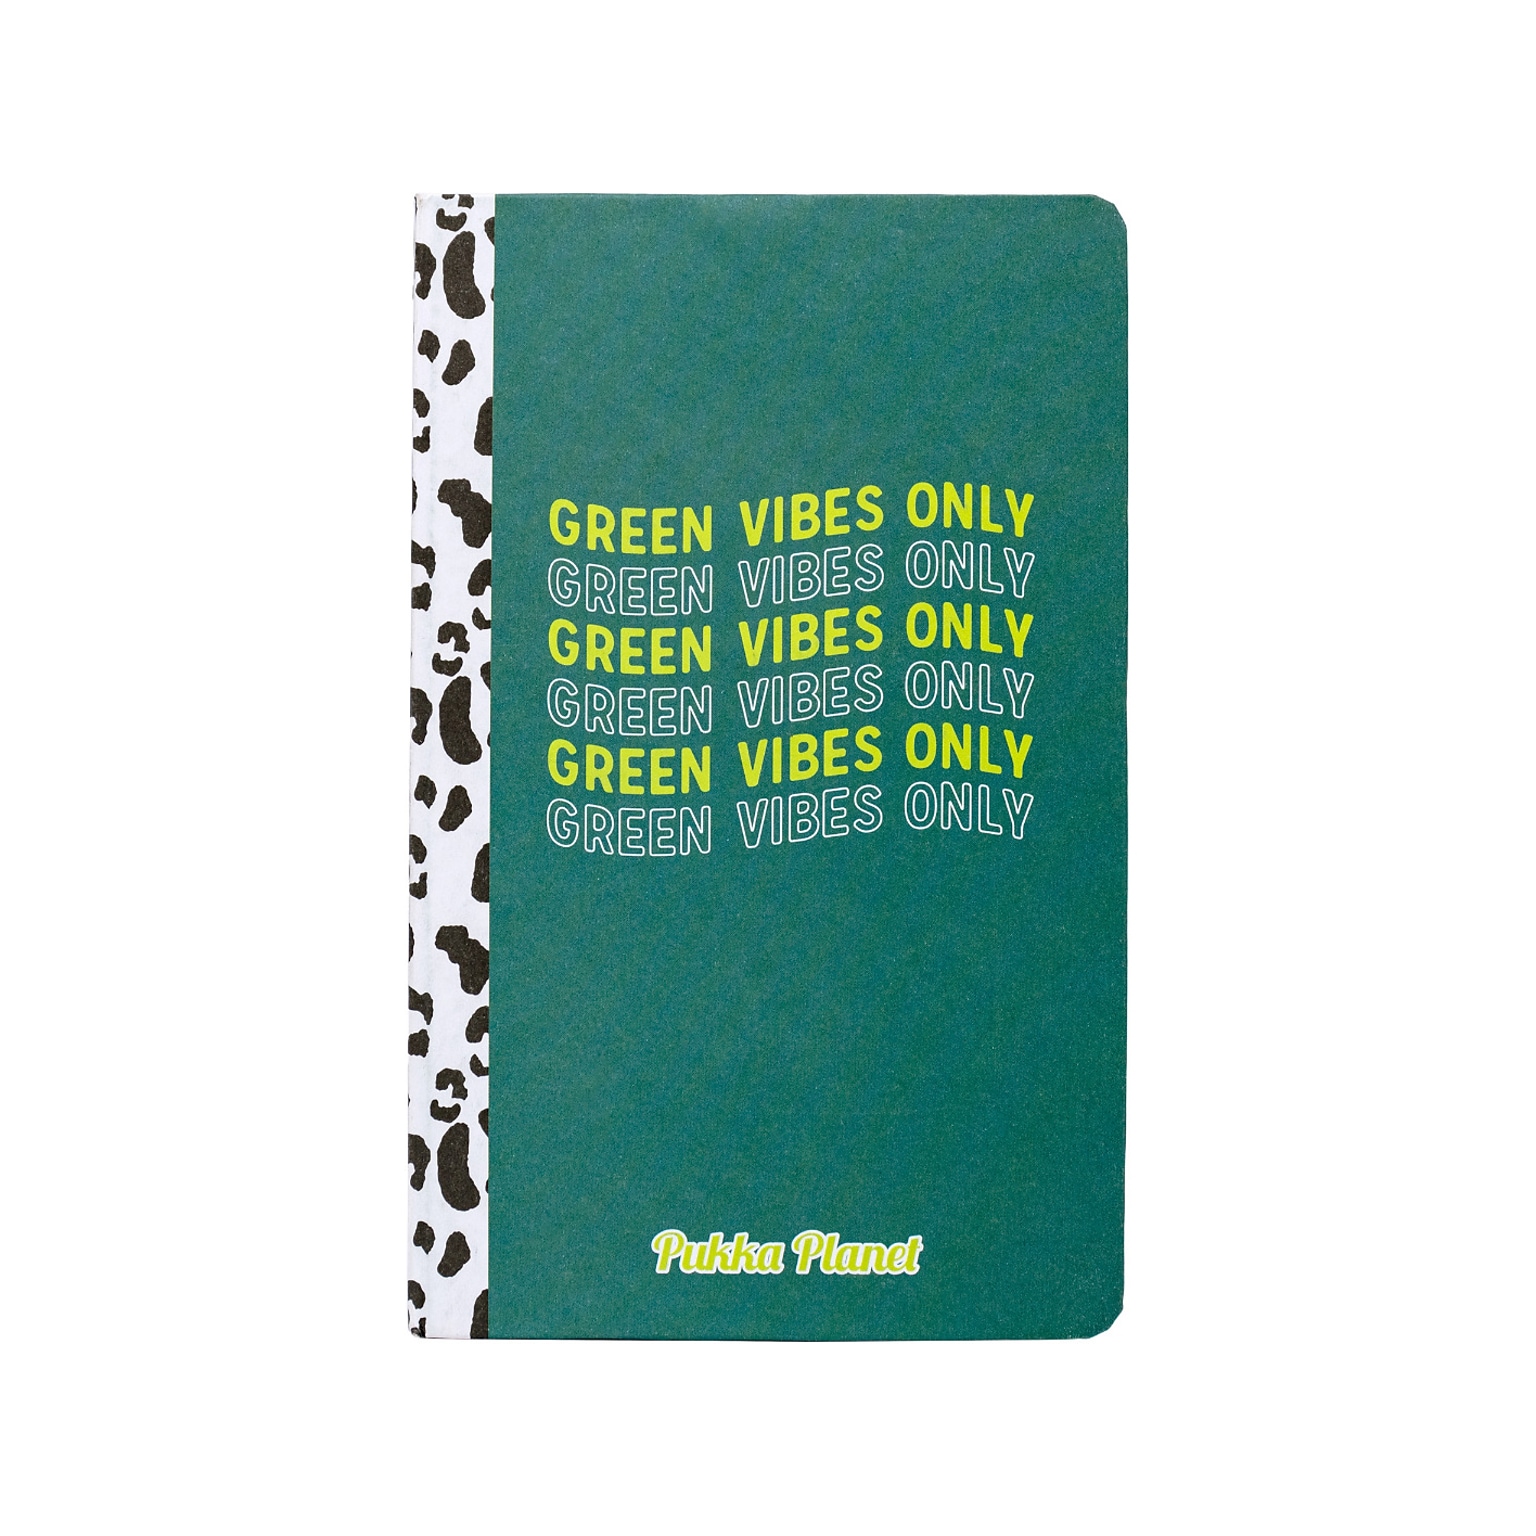 Pukka Pad Green Vibes Only Notebook, 5.28 x 8.46, Wide-Ruled, 96 Sheets, Green (9704-SPP)